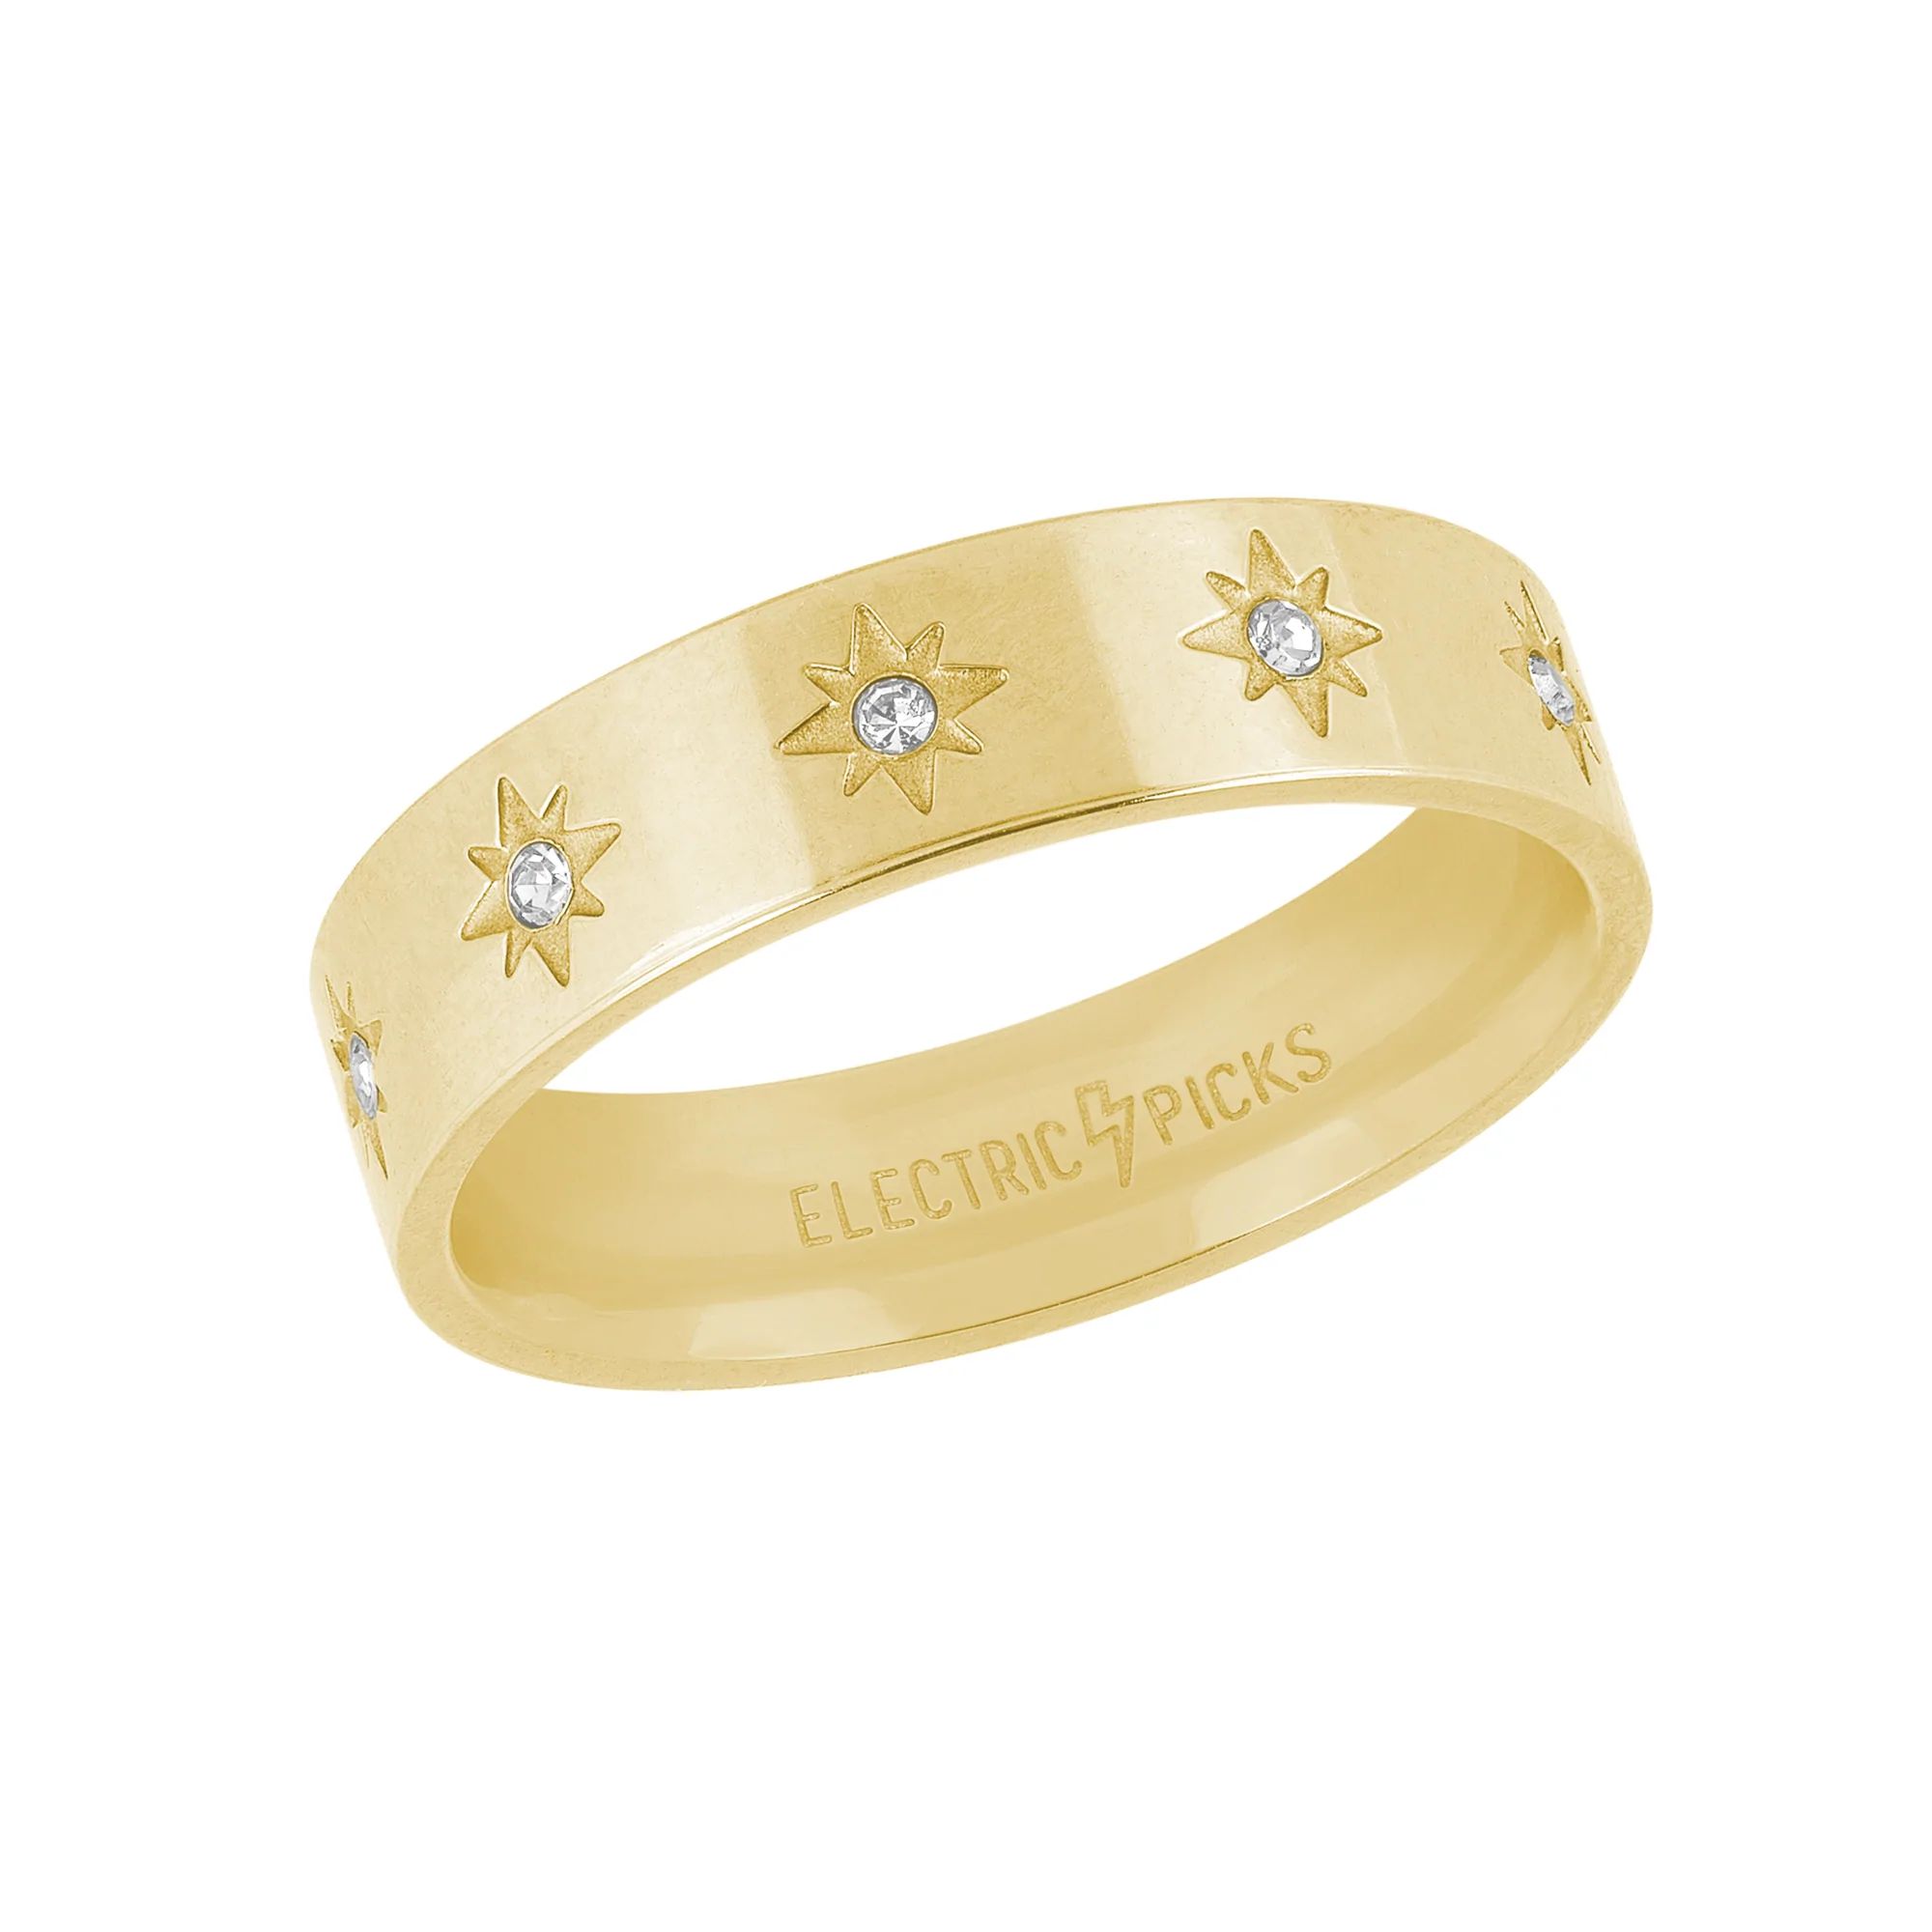 Starry Eyed Ring | Electric Picks Jewelry